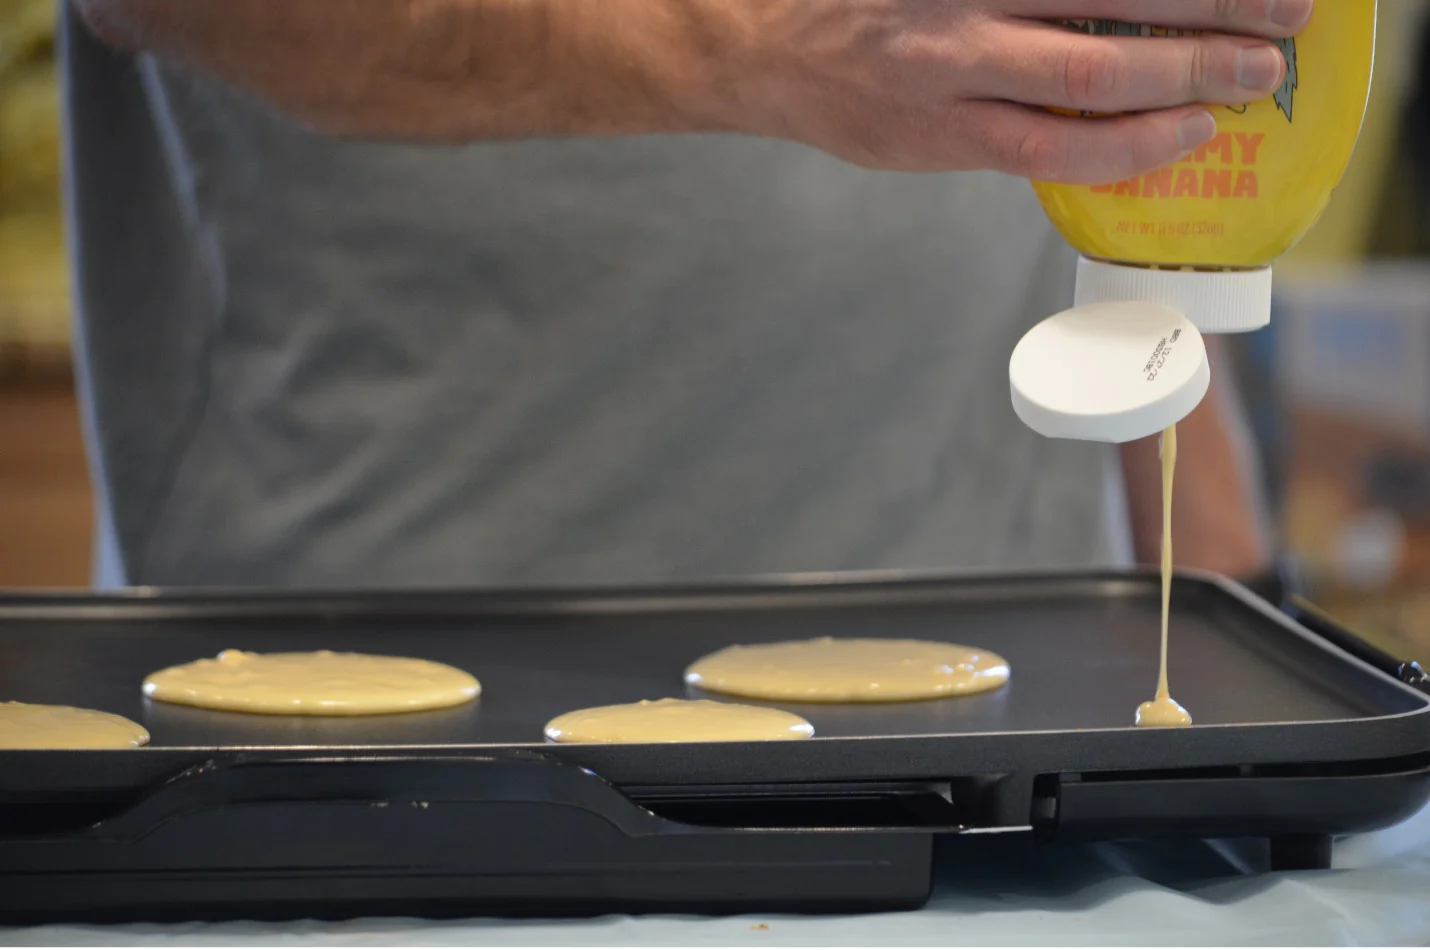 New Squeezable Pancake Batter Makes Camping Easier